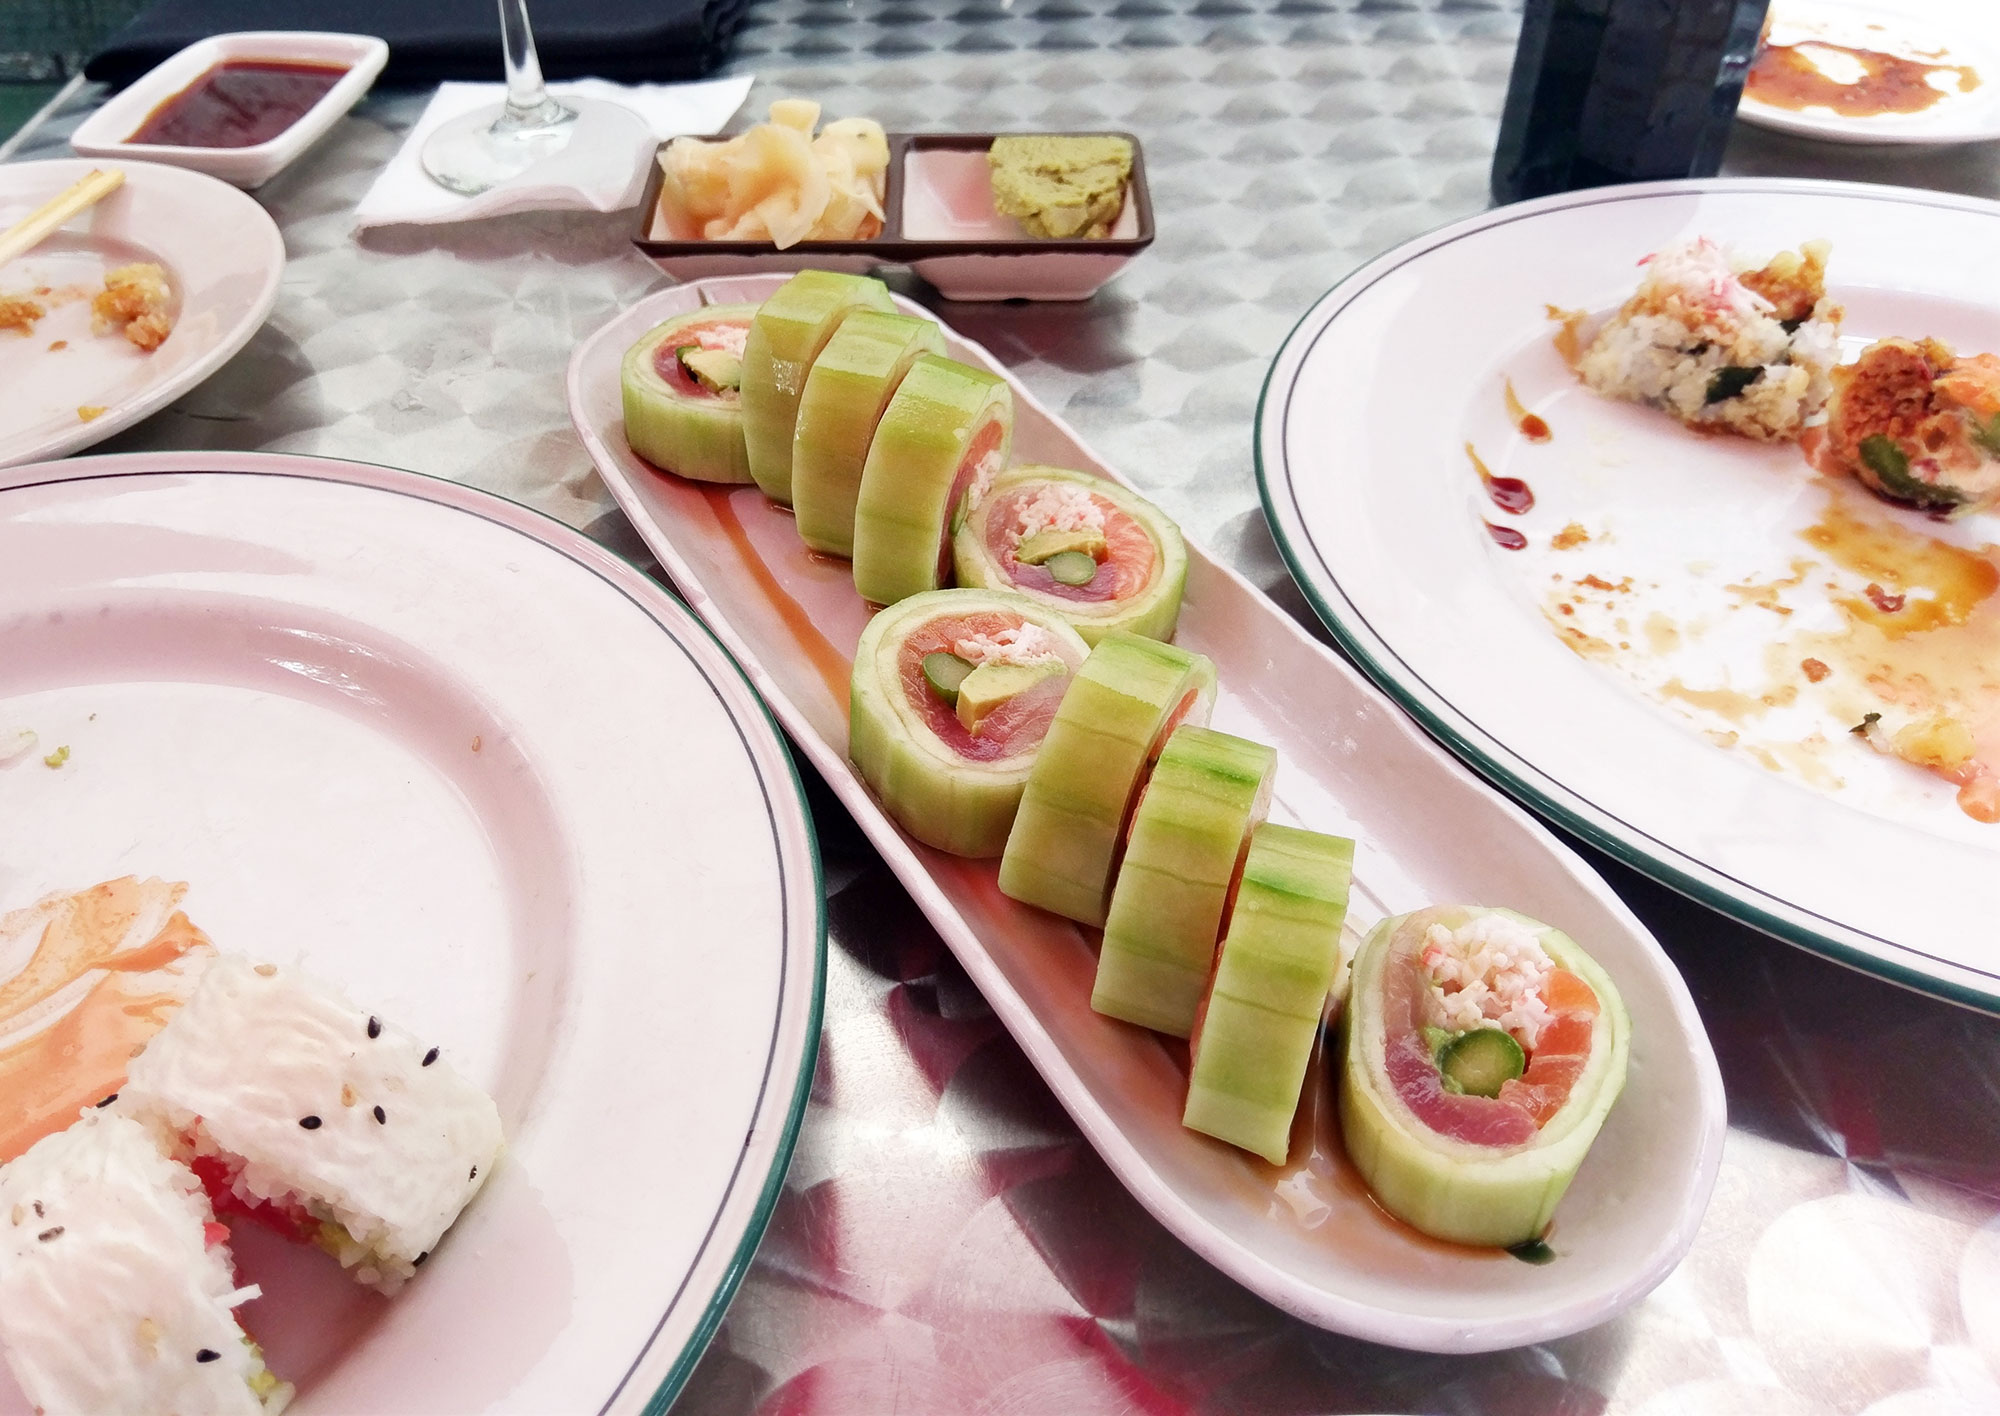 "All you can eat" sushi brunch at Gui